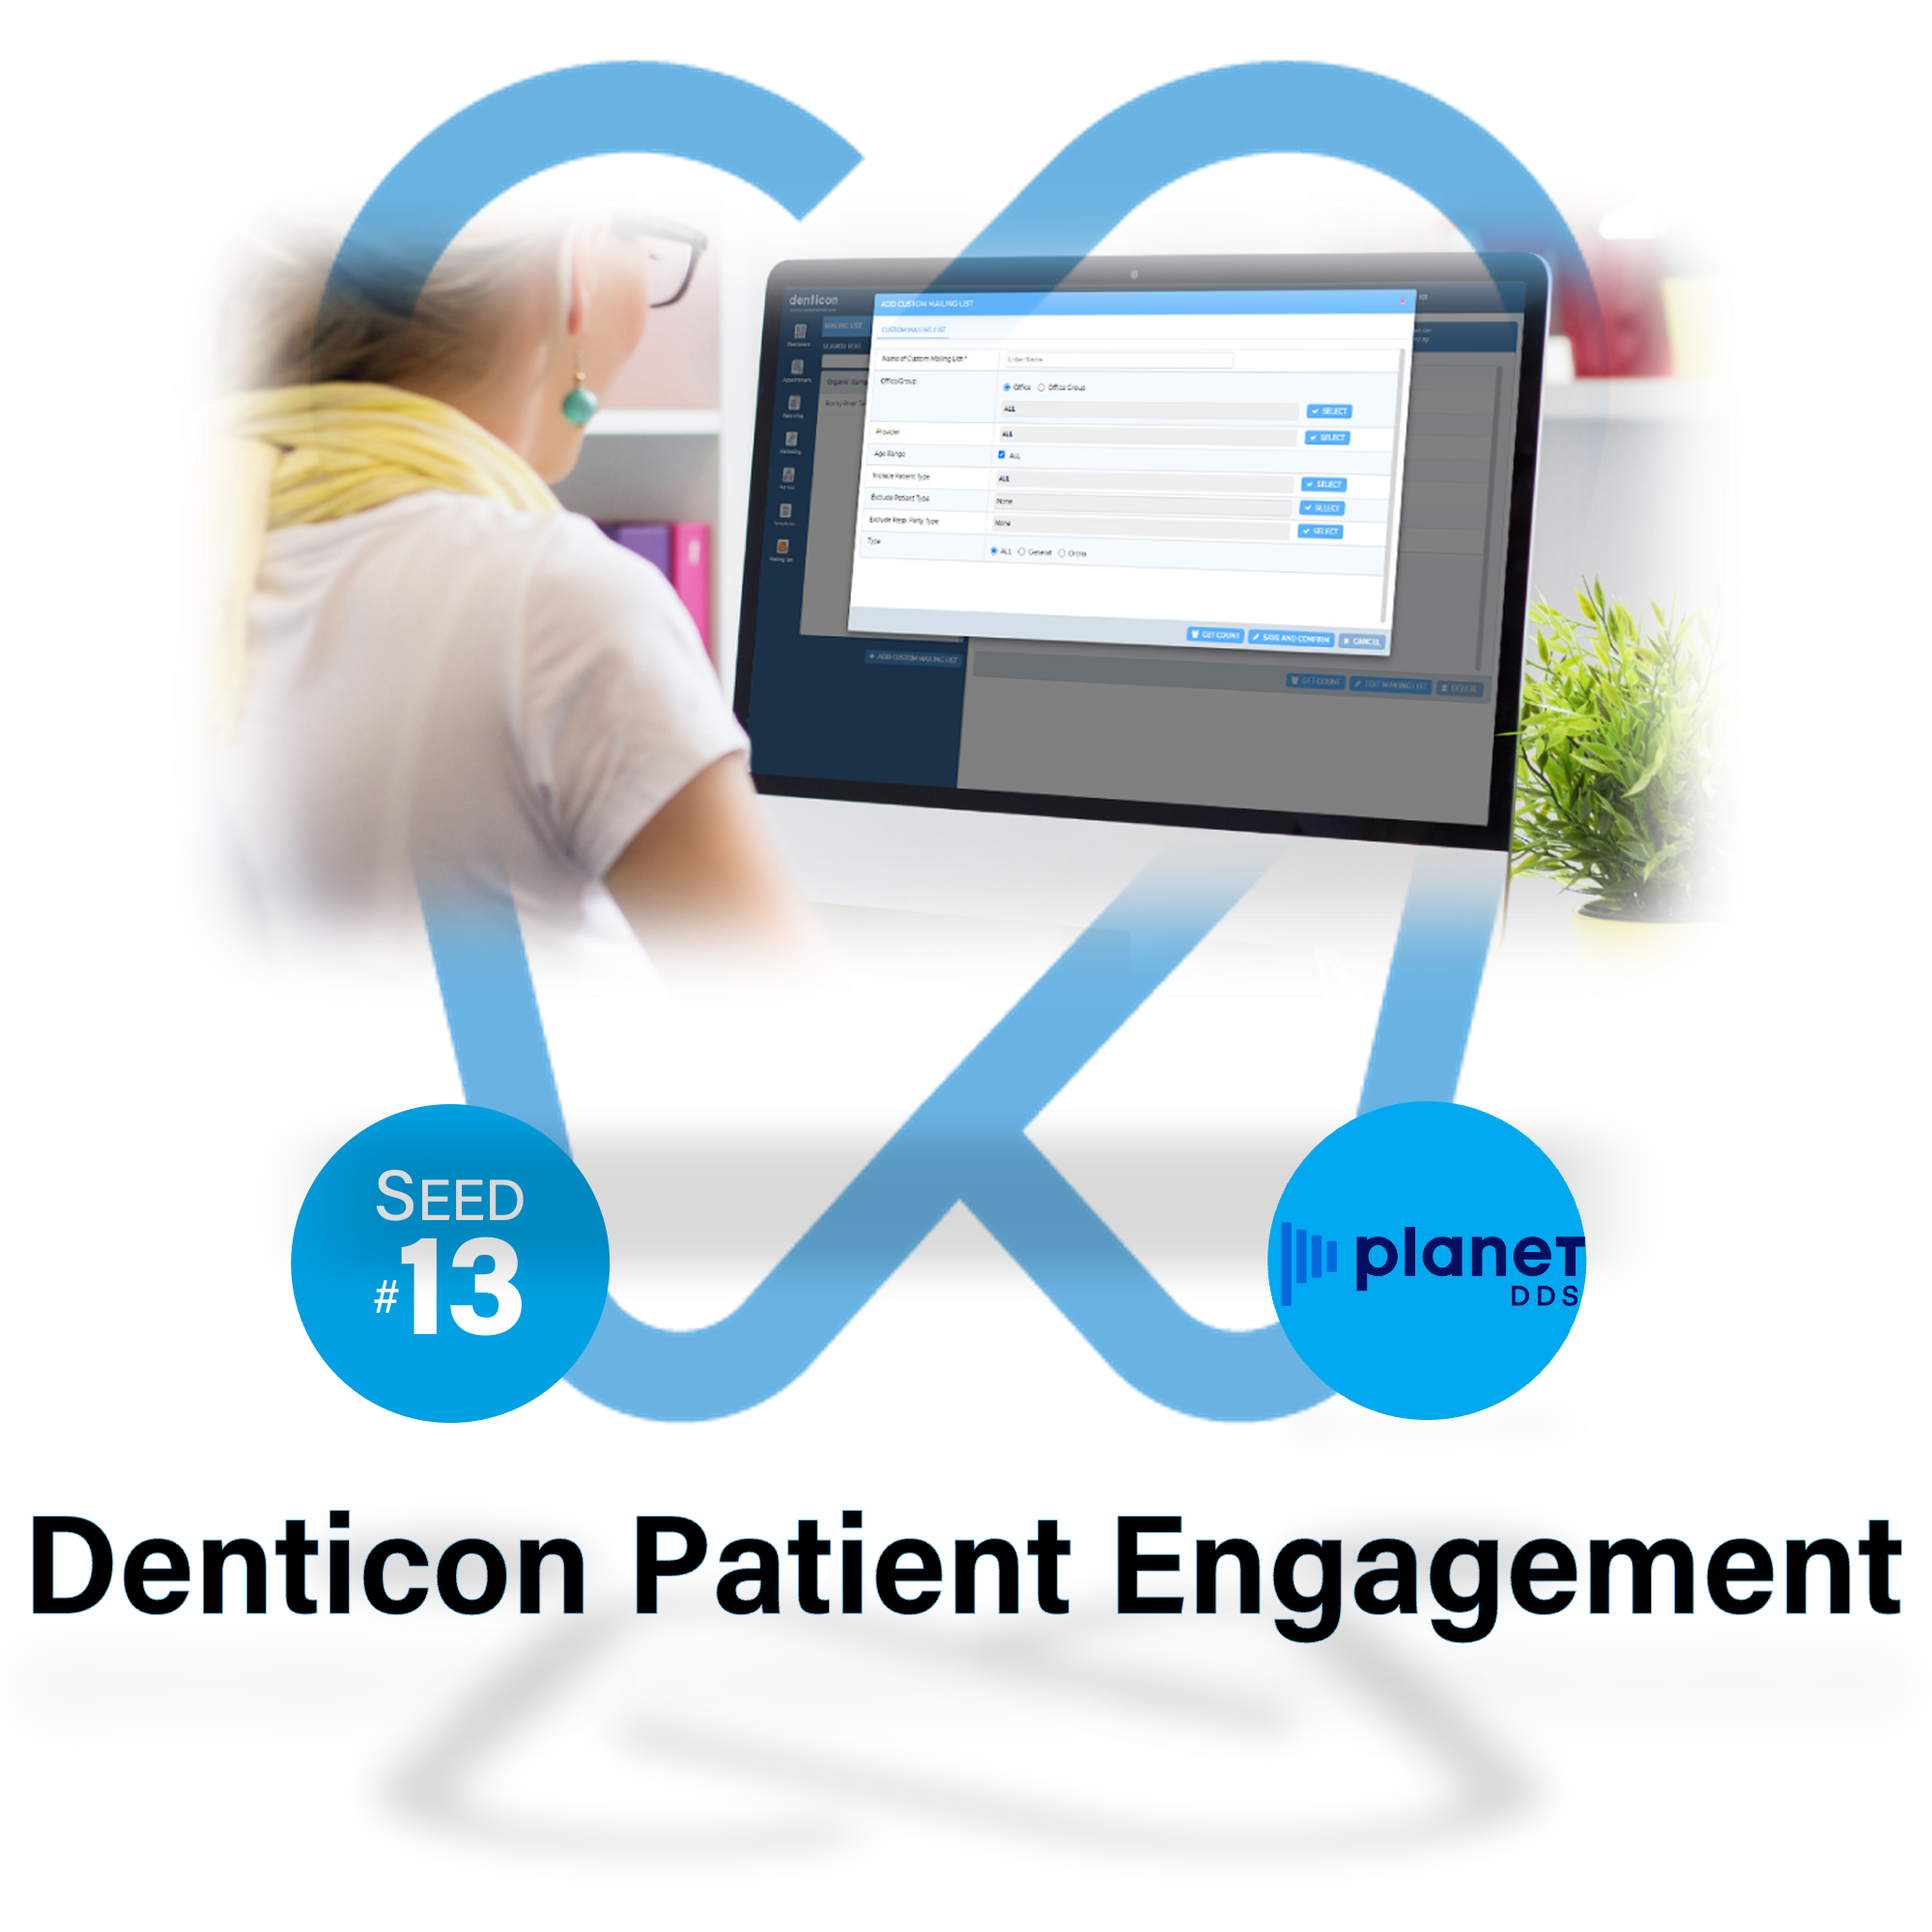 Denticon Patient Engagement from Planet DDS